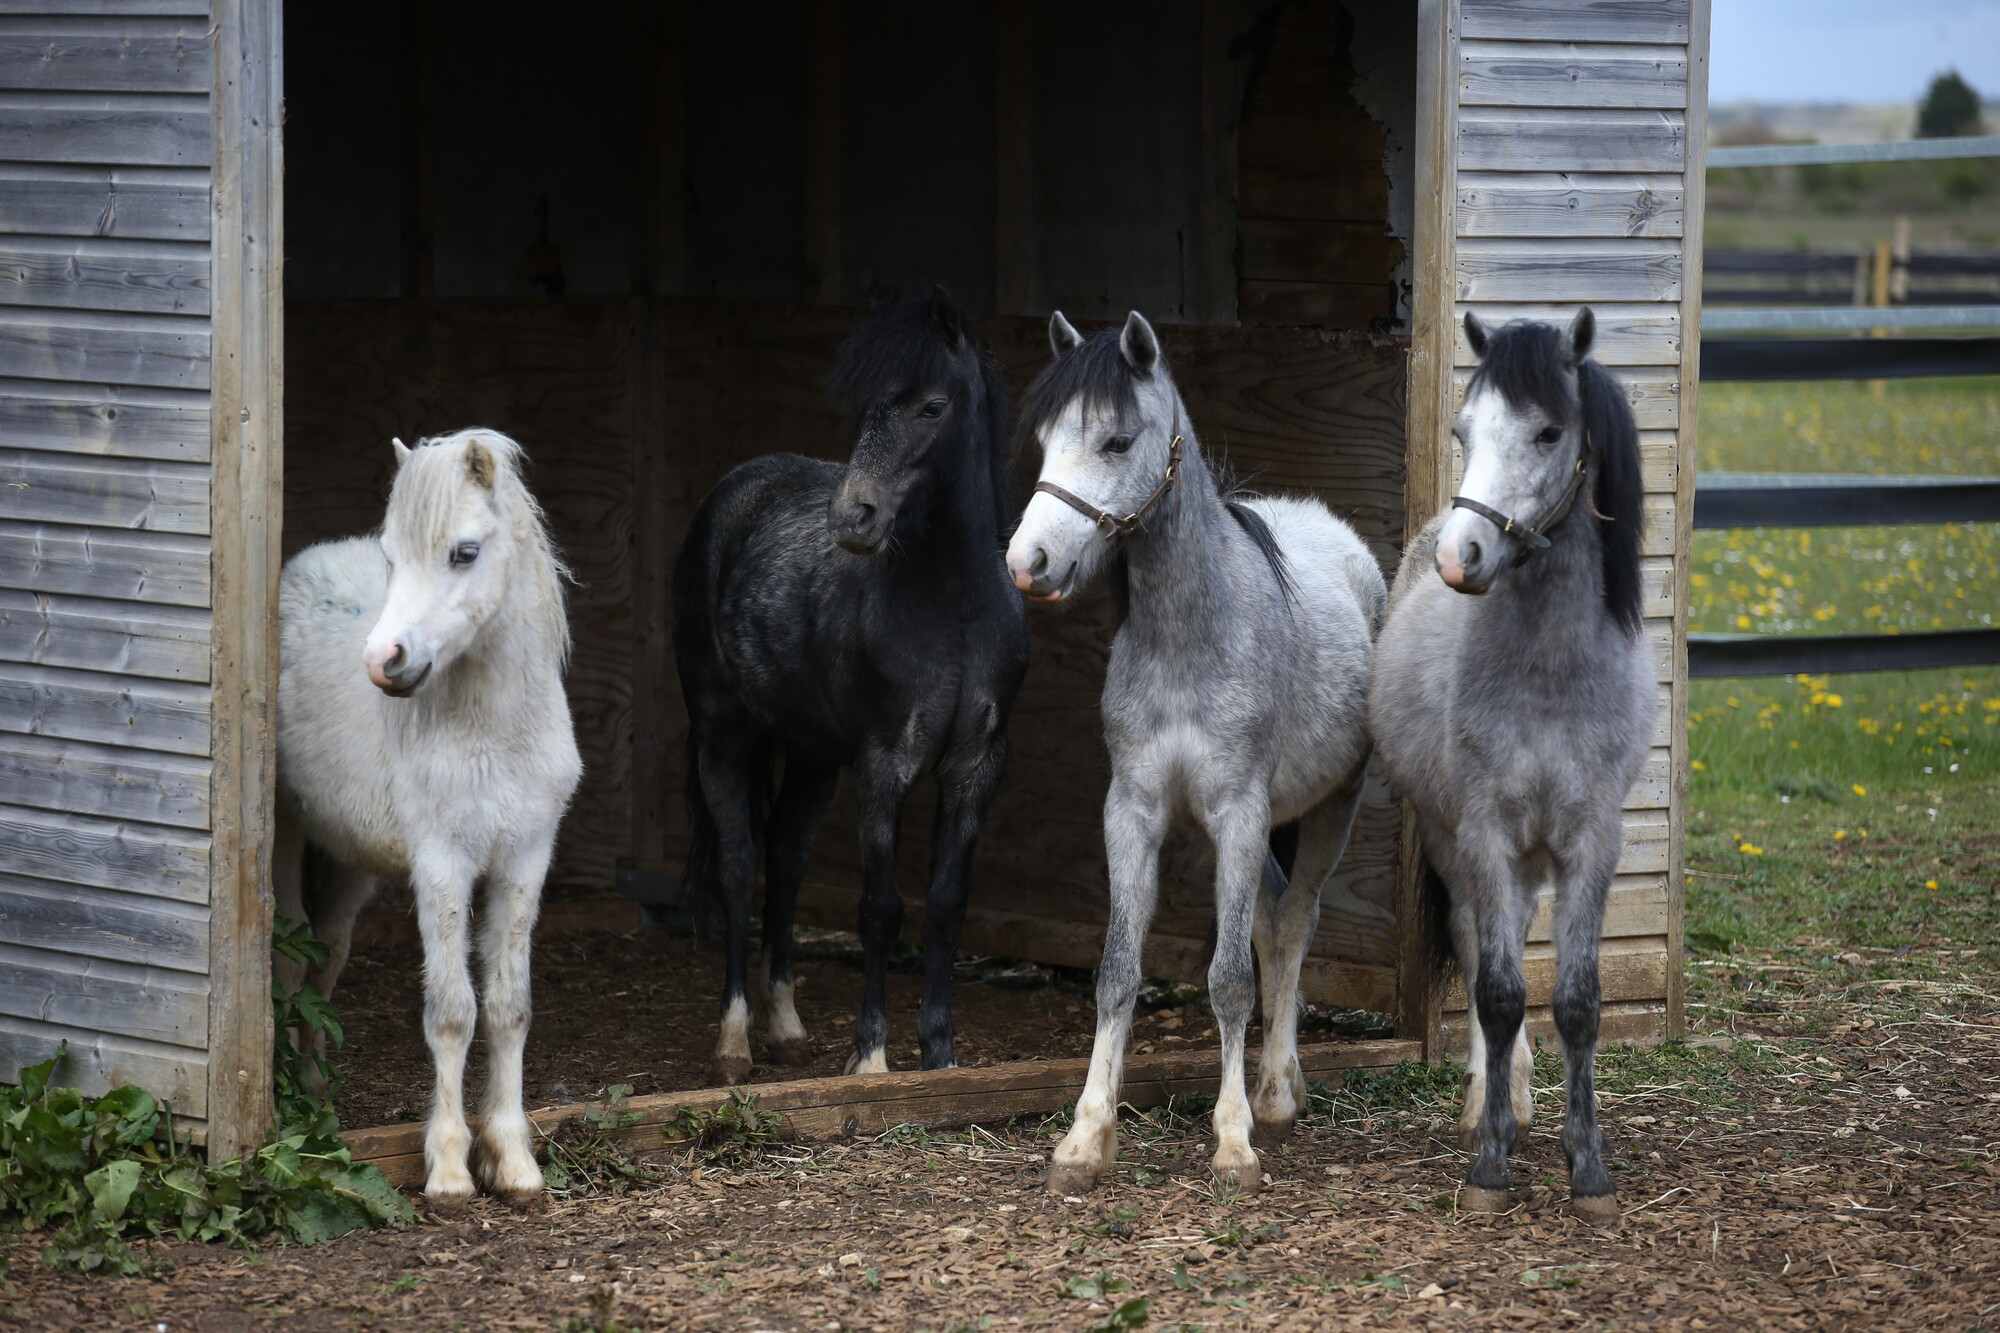 Four horses, white, black and grey, standing under a wooden shelter in a field